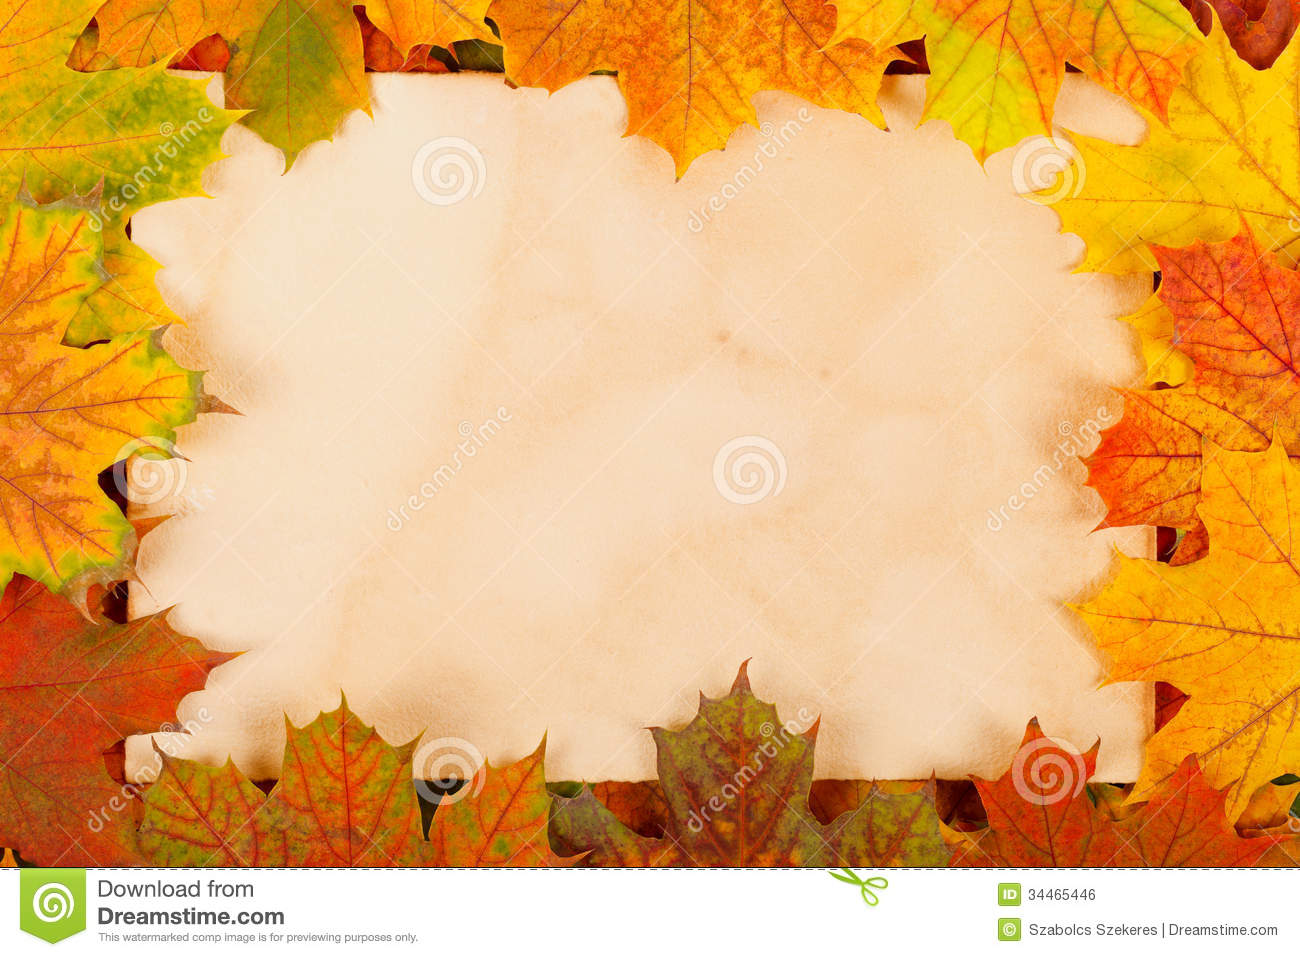 Autumn Leaves As Border Royalty Free Stock Image   Image  34465446